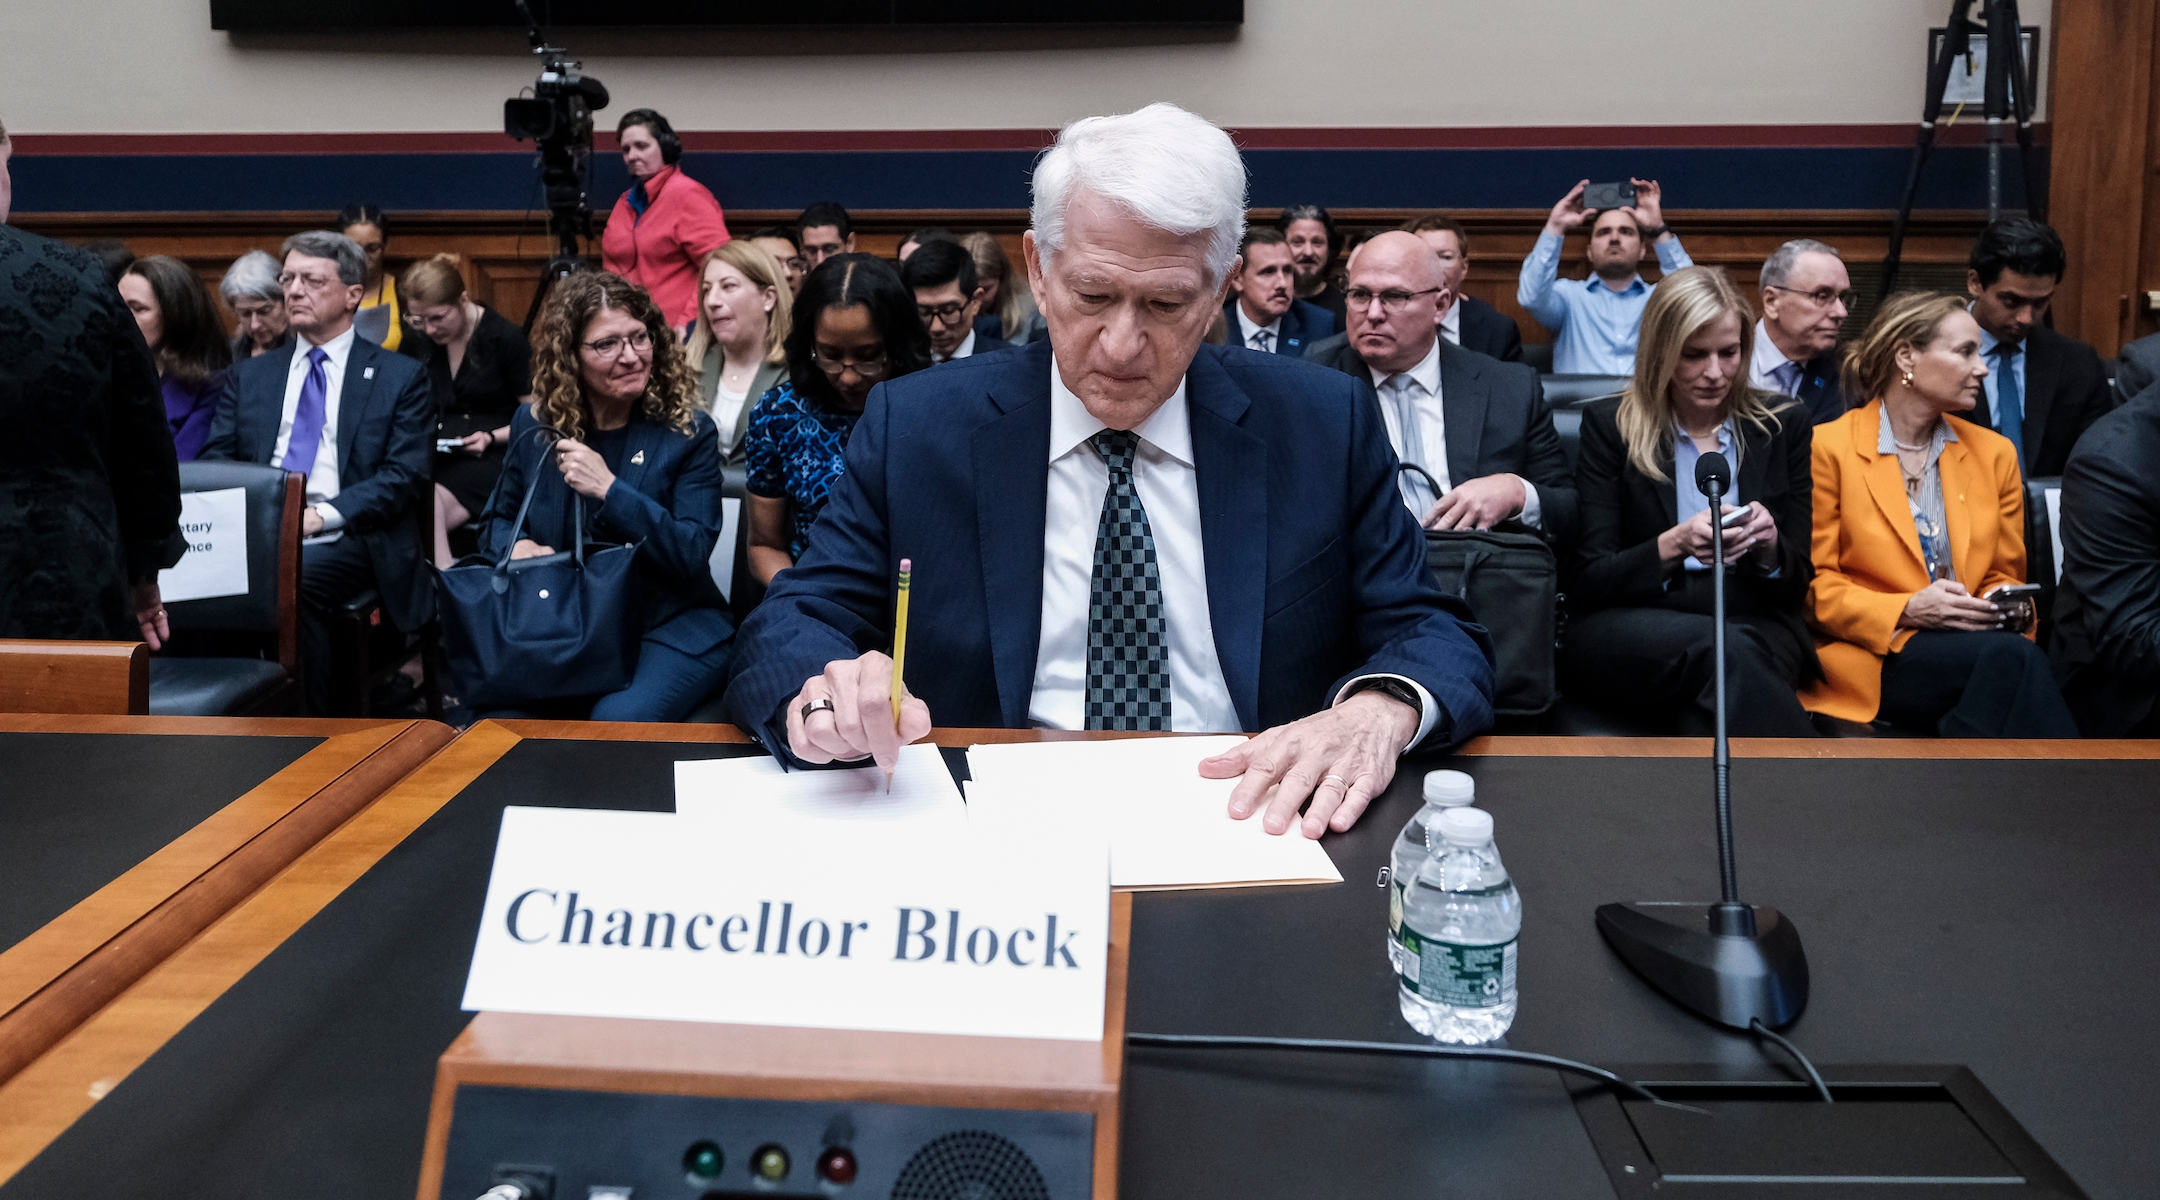 A university chancellor testifies before a Congressional hearing.